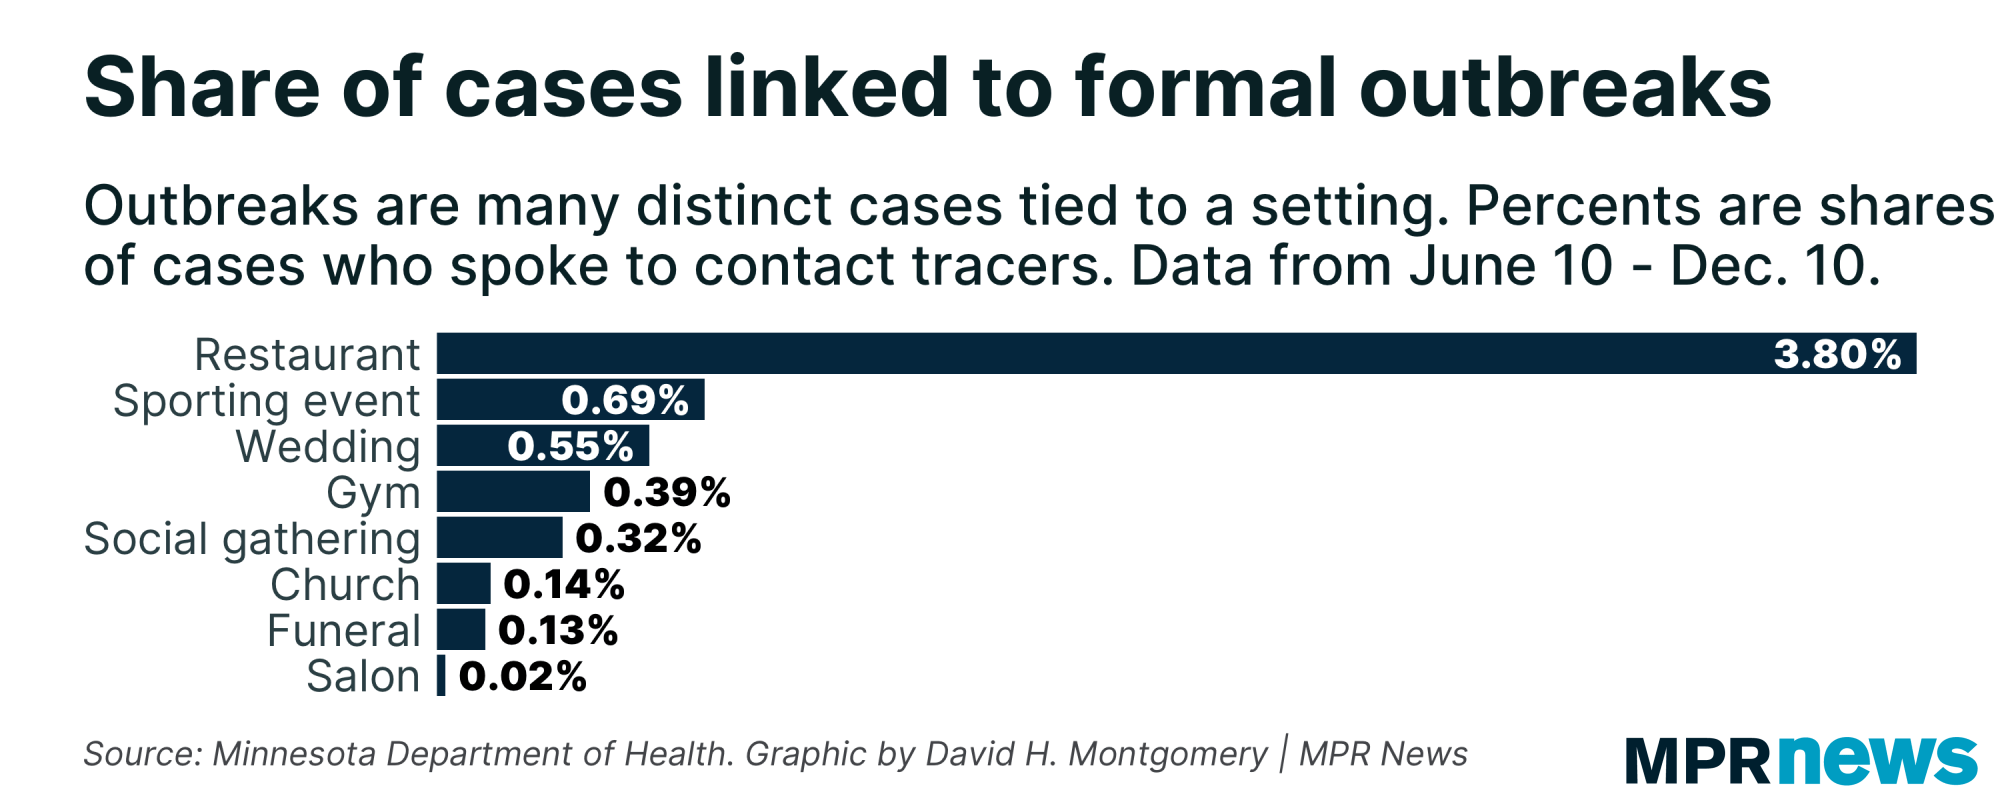 Graphic: Share of COVID-19 cases linked to formal outbreaks in Minnesota.